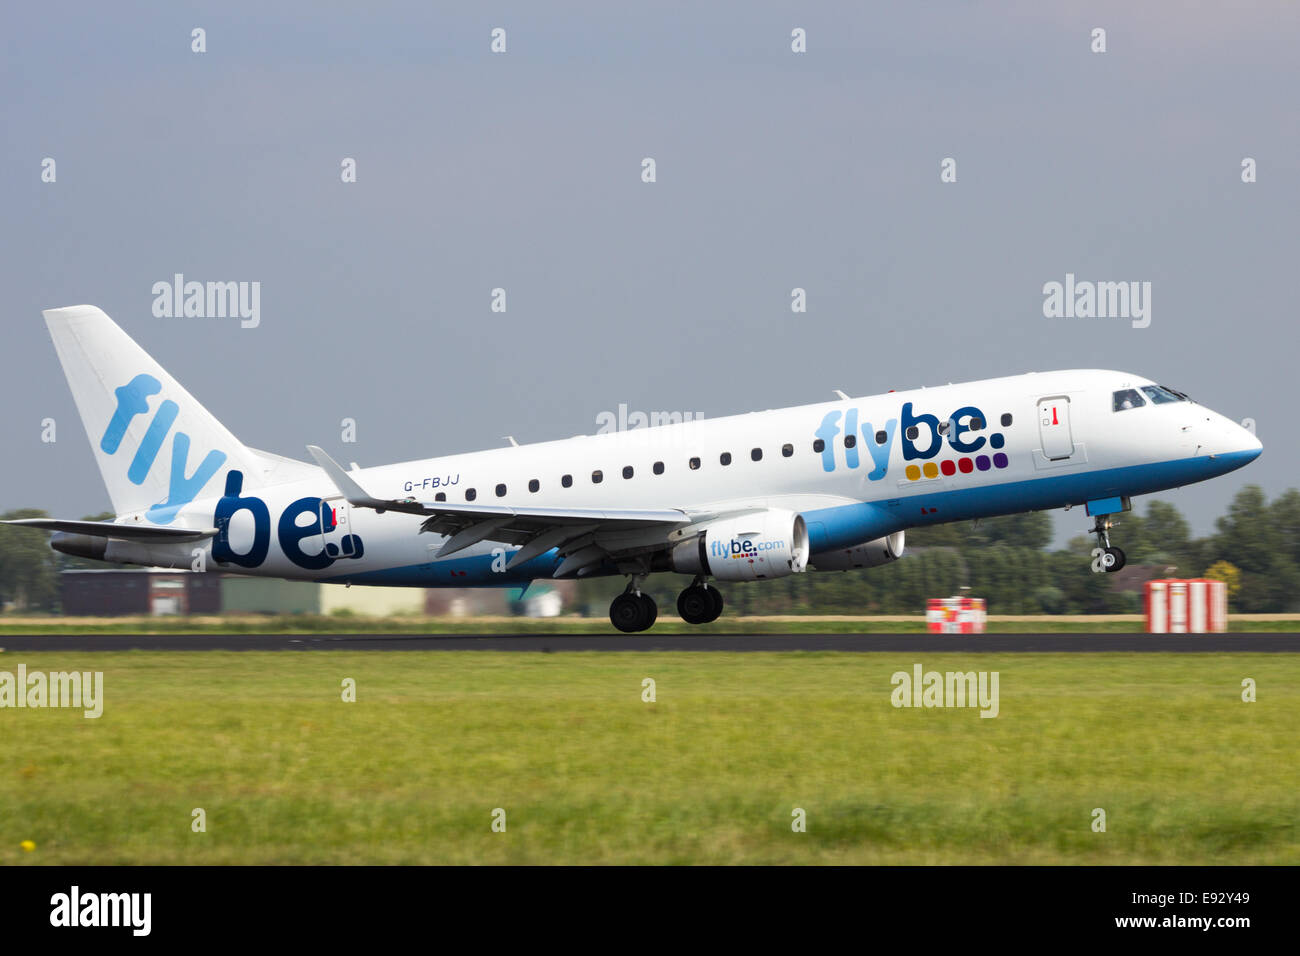 Flybe Embraer ERJ-175 arriving at Schiphol airport. Stock Photo